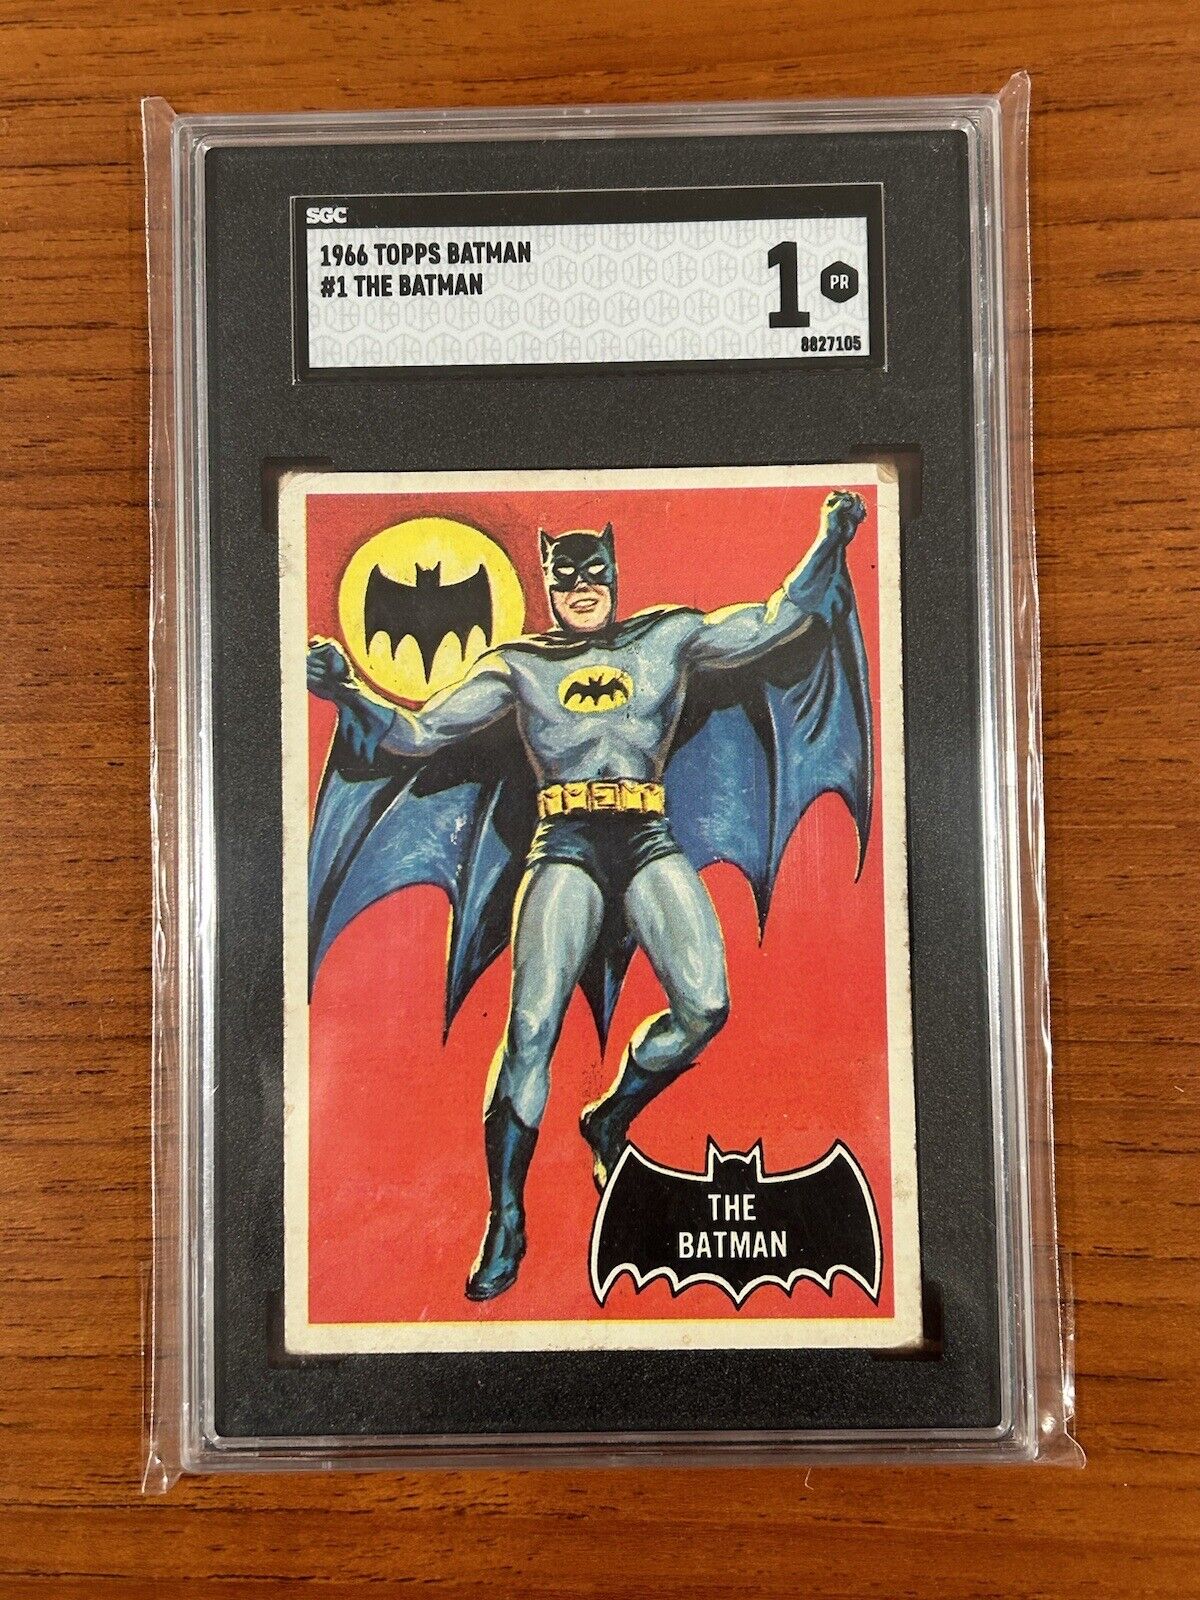 🔥The BATMAN 1966 Topps #1 Rookie Card SGC1 Beautiful Appealing Front😞Sad Back